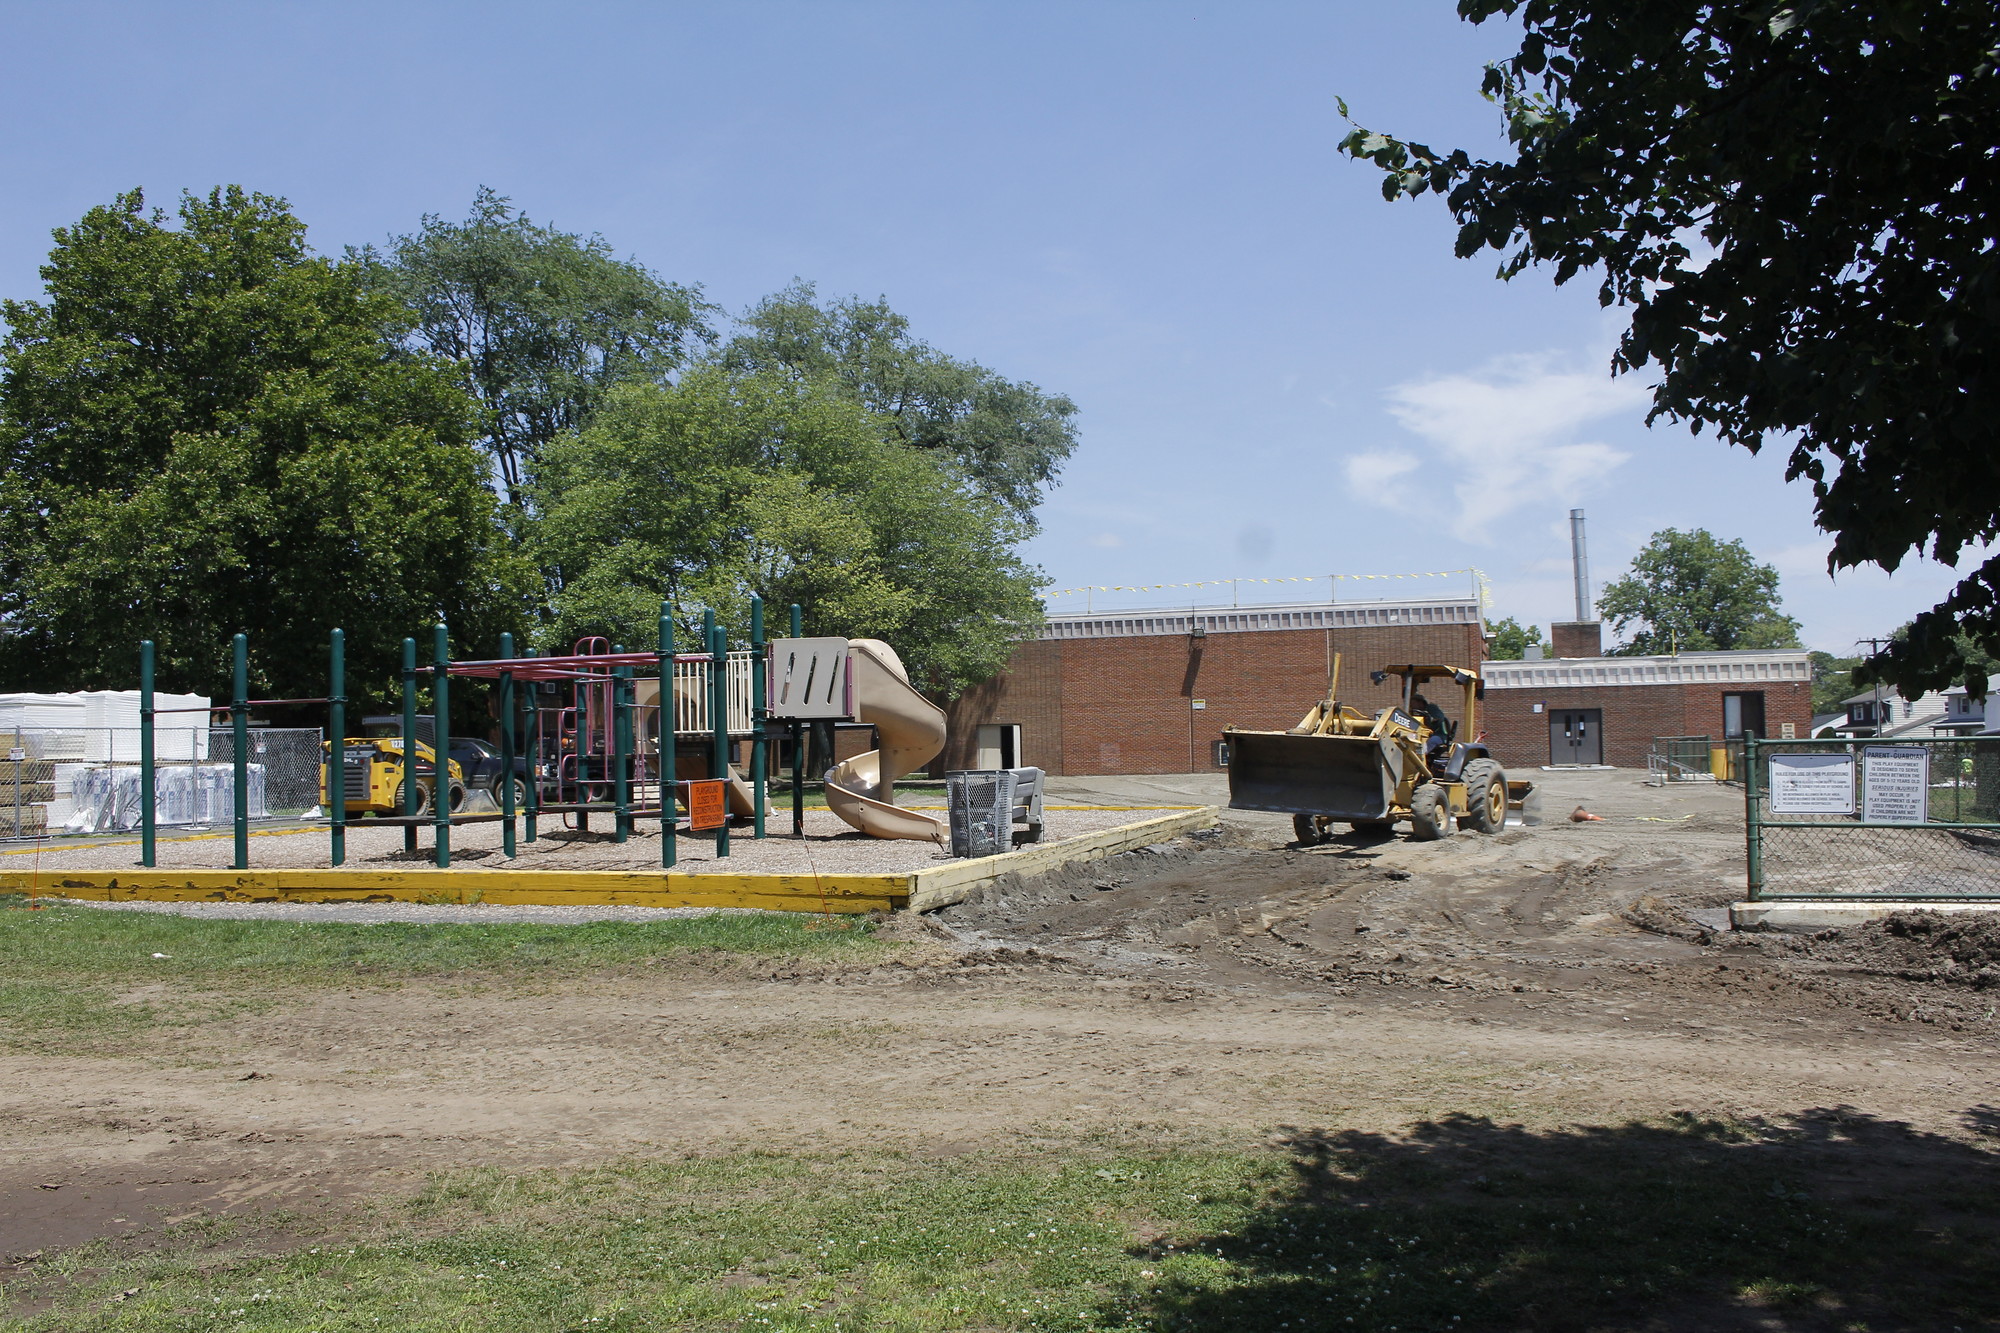 School No. 2’s playground is closed due to construction, which will include new asphalt for the parking lot and walkways.